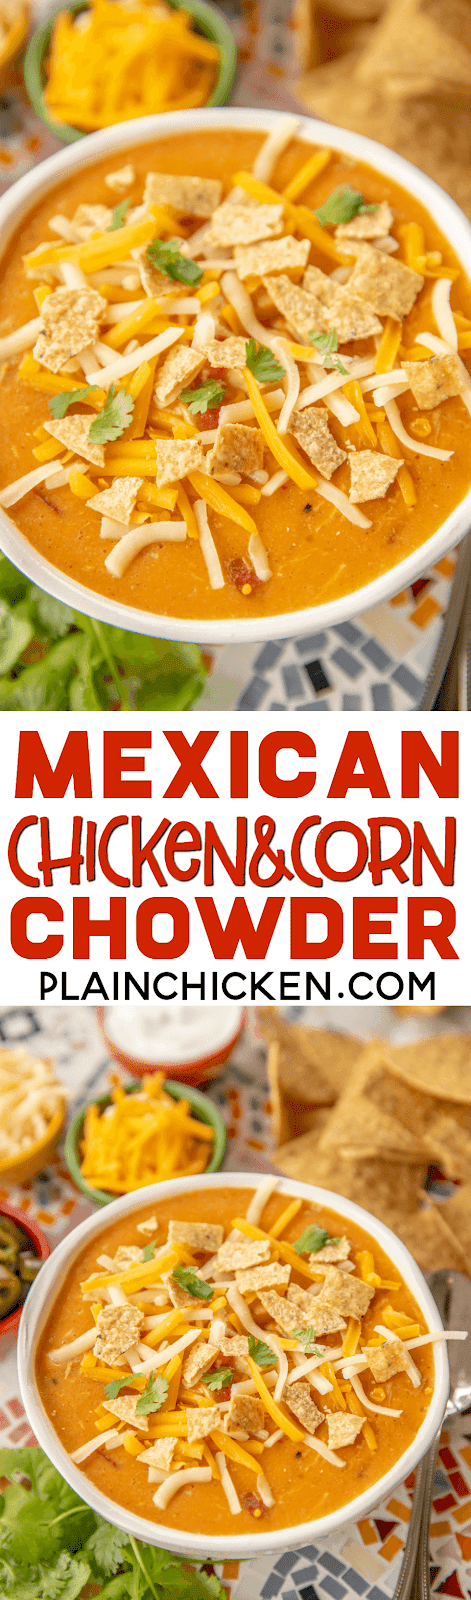 Mexican Chicken Corn Chowder - so simple and delicious!! Ready in about 30 minutes!! Chicken, creamed corn, diced tomatoes and green chiles, cumin, onion, garlic, chicken broth, half-and-half and cheese. SO creamy and delicious! Everyone went back for seconds. Such a quick and easy weeknight meal! #soup #chicken #mexican #30minutemeal #easydinner